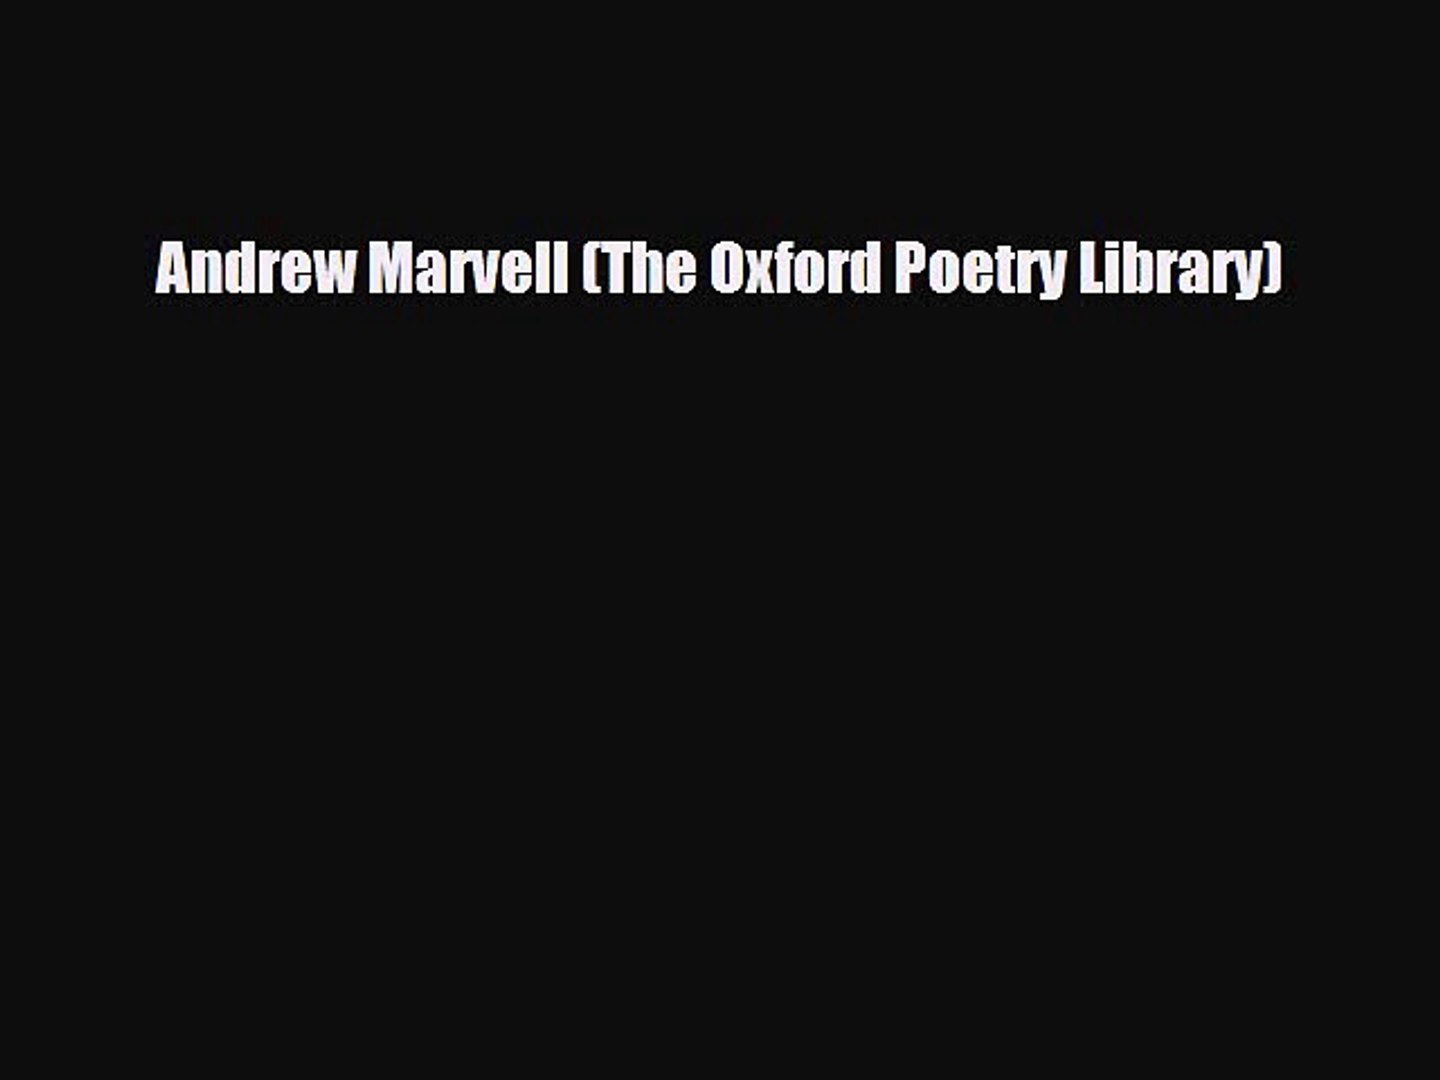 Pdf Download Andrew Marvell The Oxford Poetry Library Pdf Full